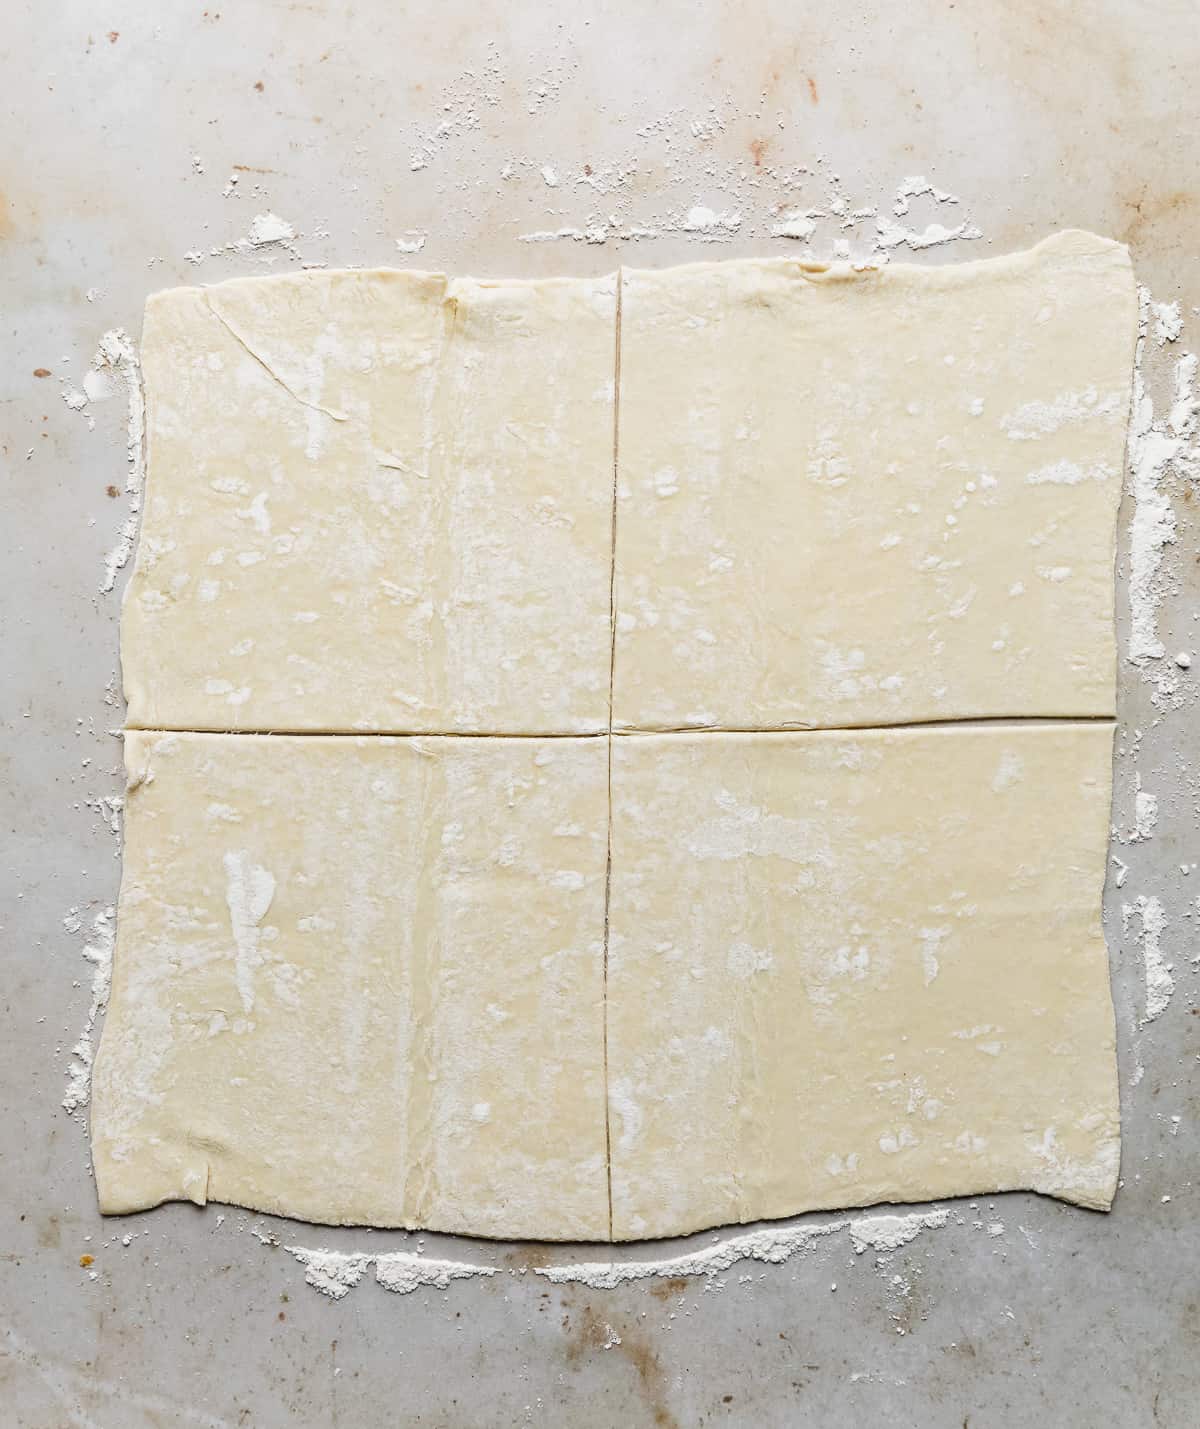 A square of puff pastry cut into 4 equal squares.